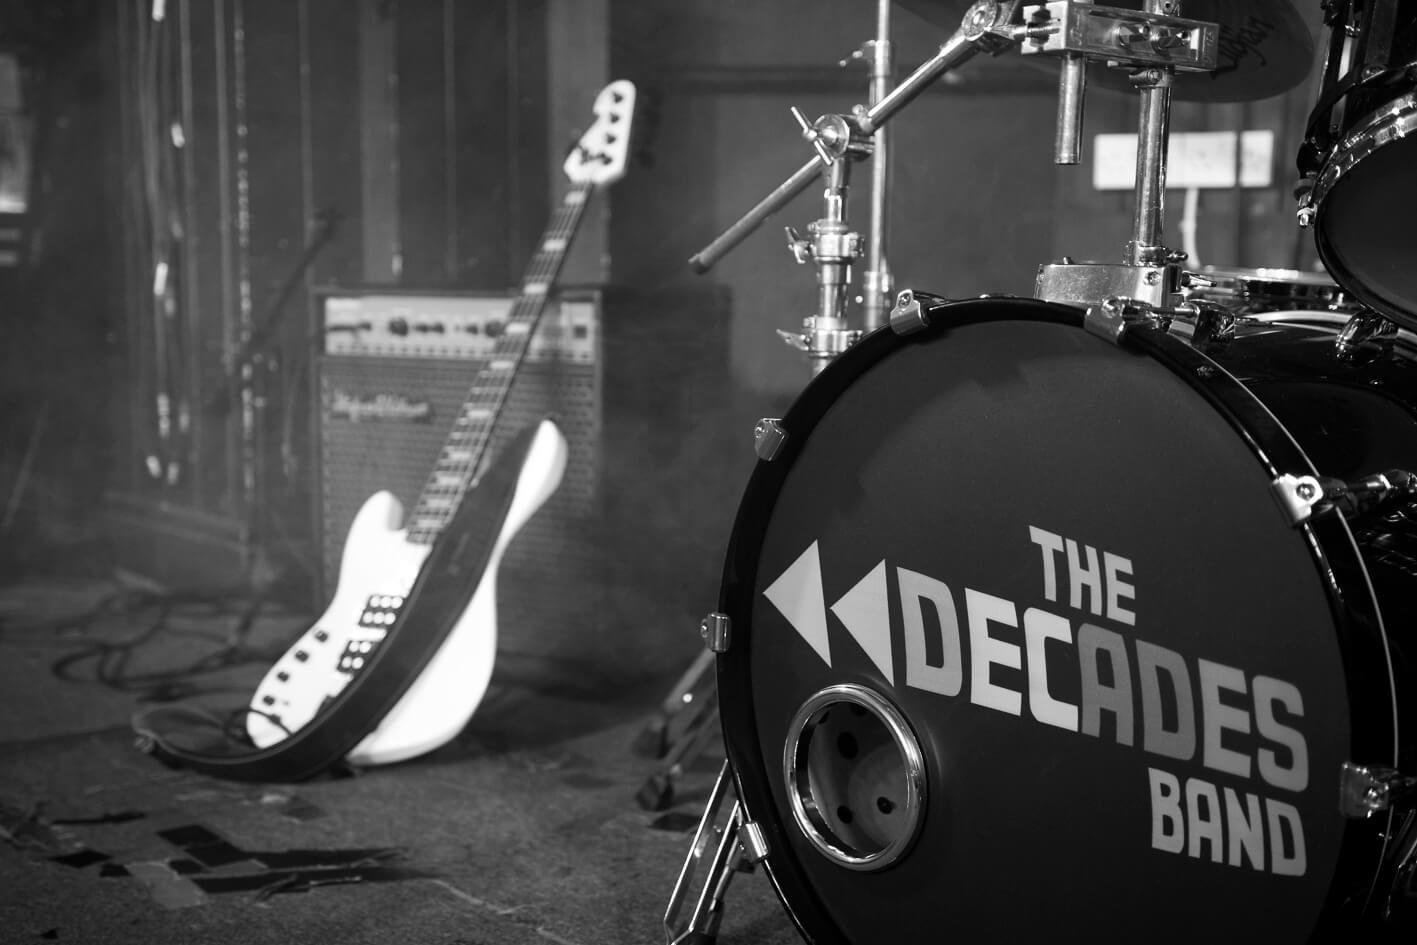 The Decades Band stage showing drum kit and guitar